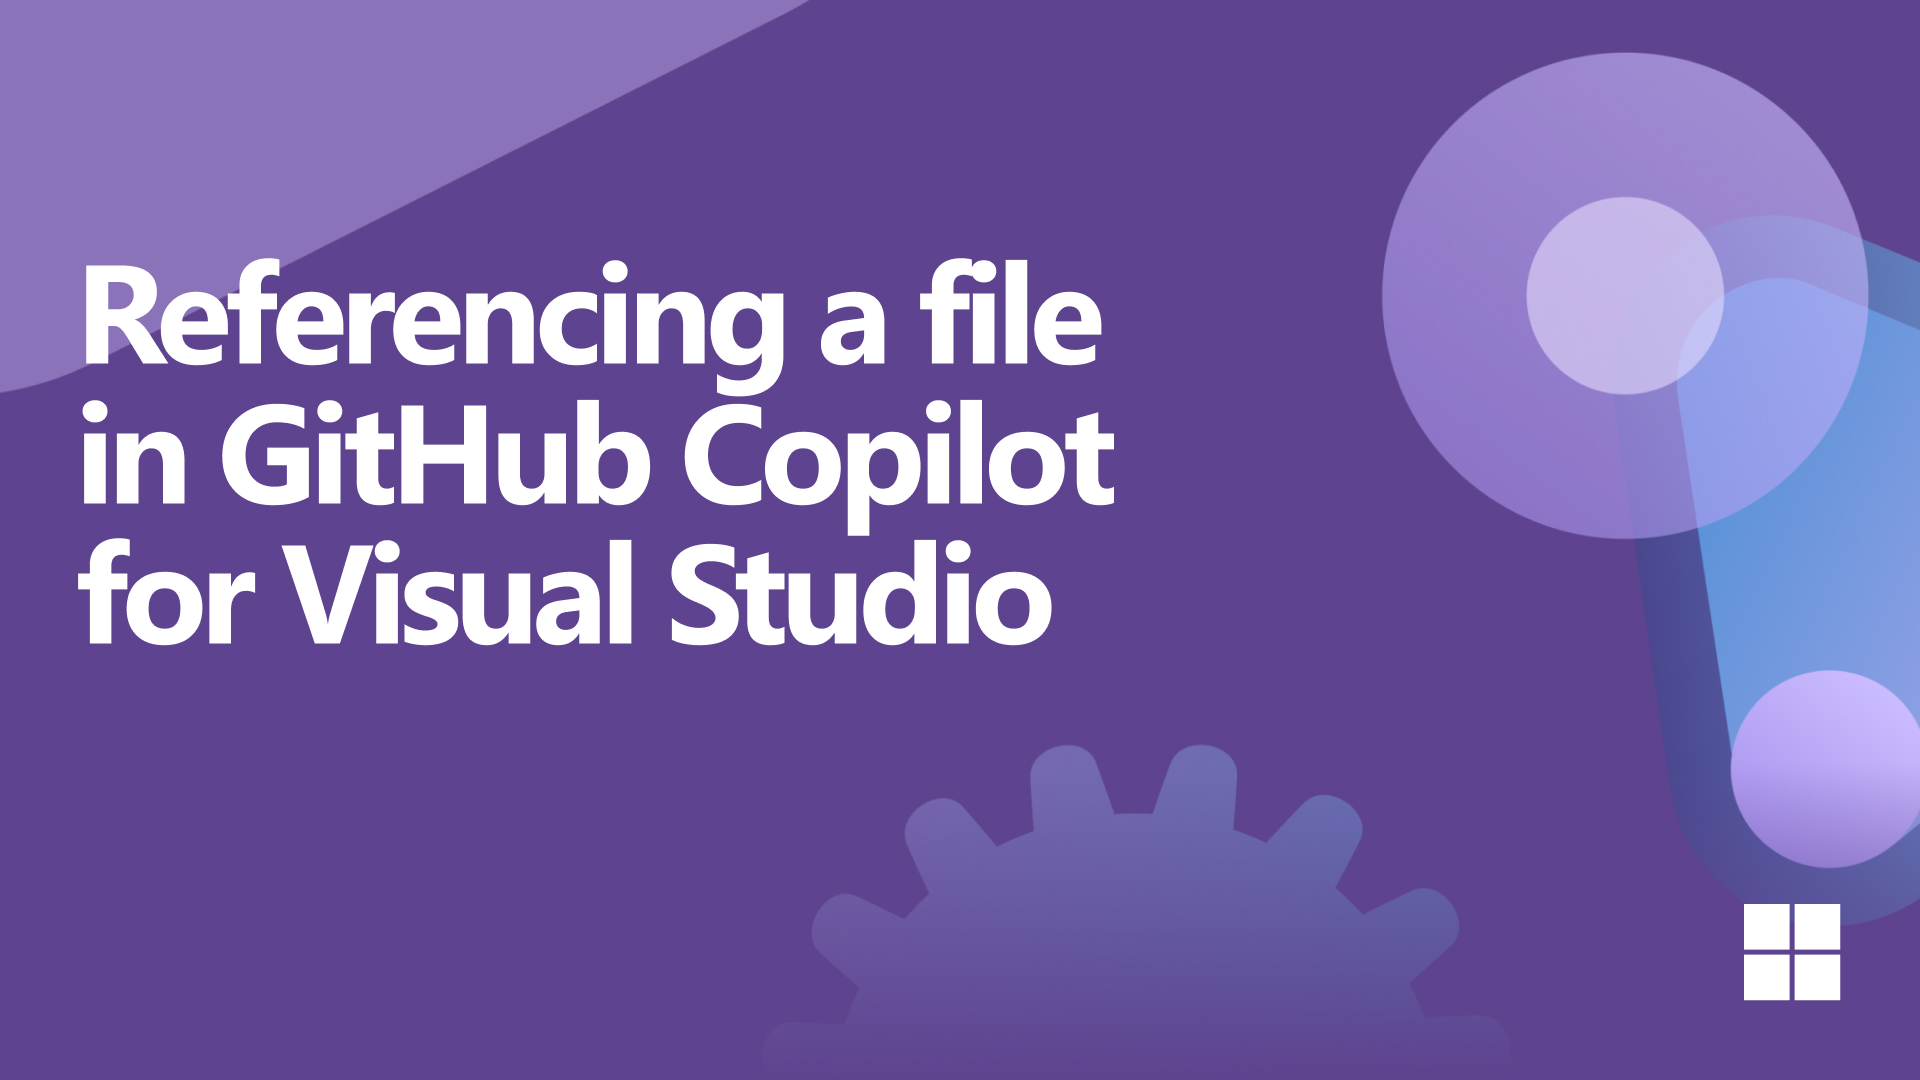 Referencing a file in GitHub Copilot for Visual Studio video screenshot